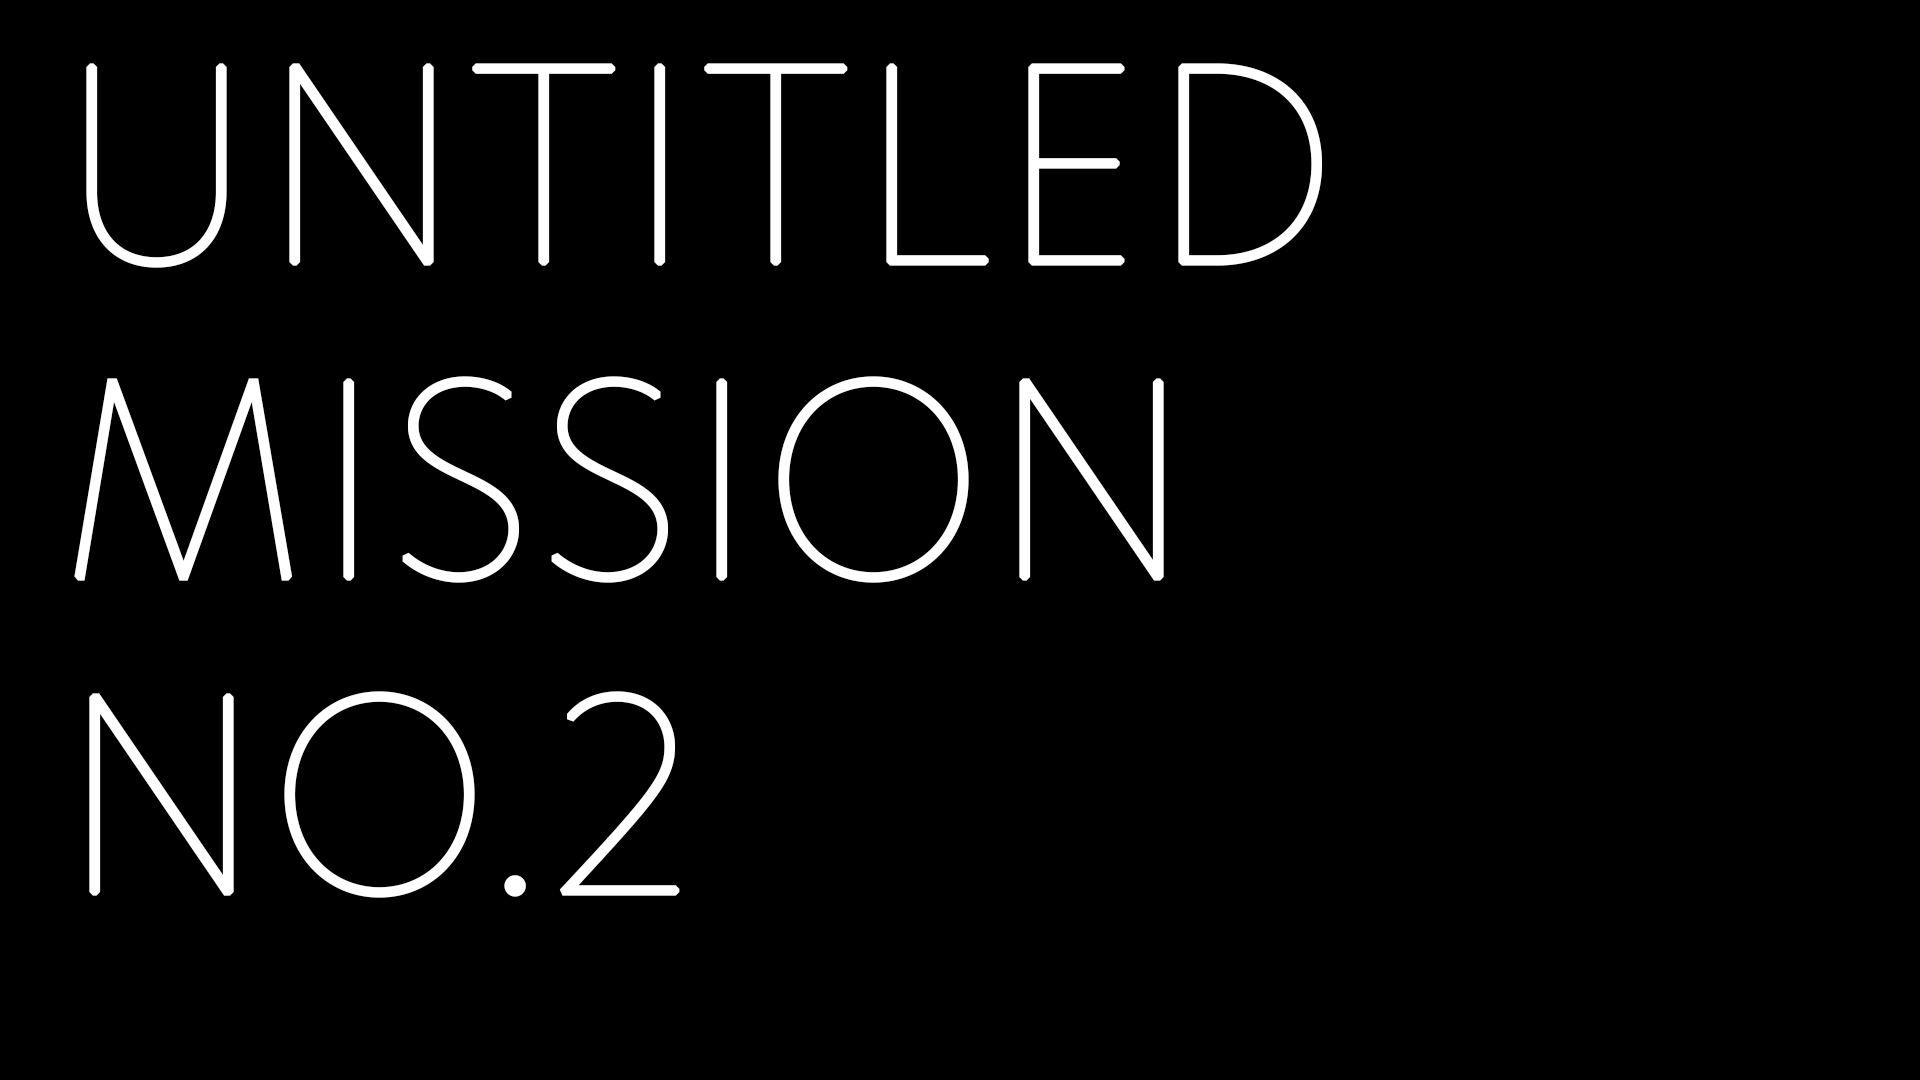 UNTITLED MISSION NO.2